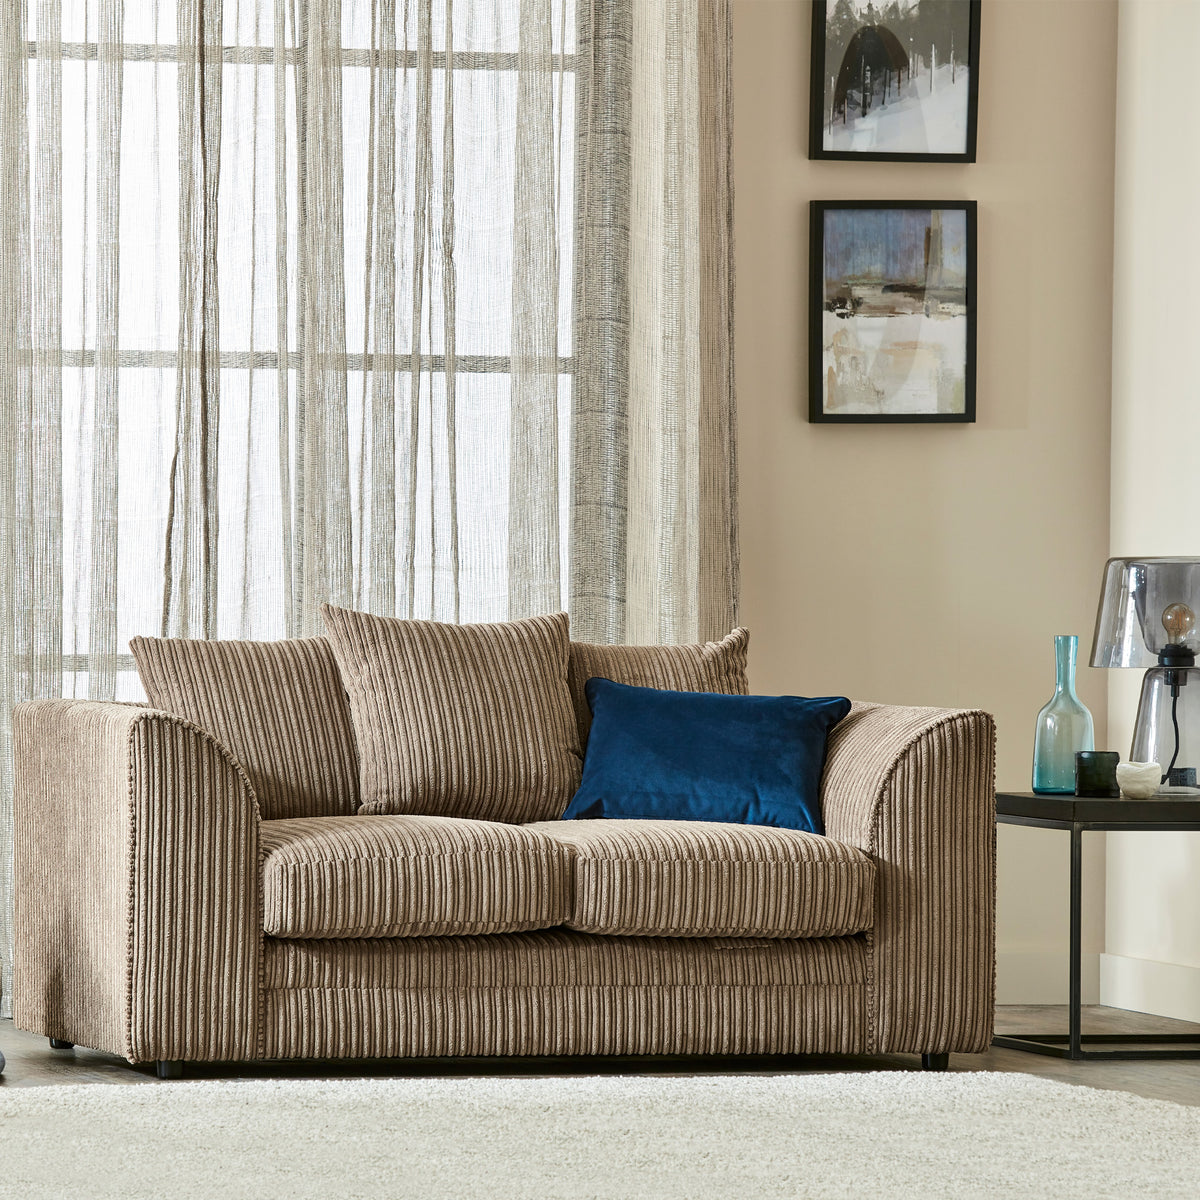 Bletchley Coffee Jumbo Cord 2 Seater Sofa for Living Room from Roseland Furniture